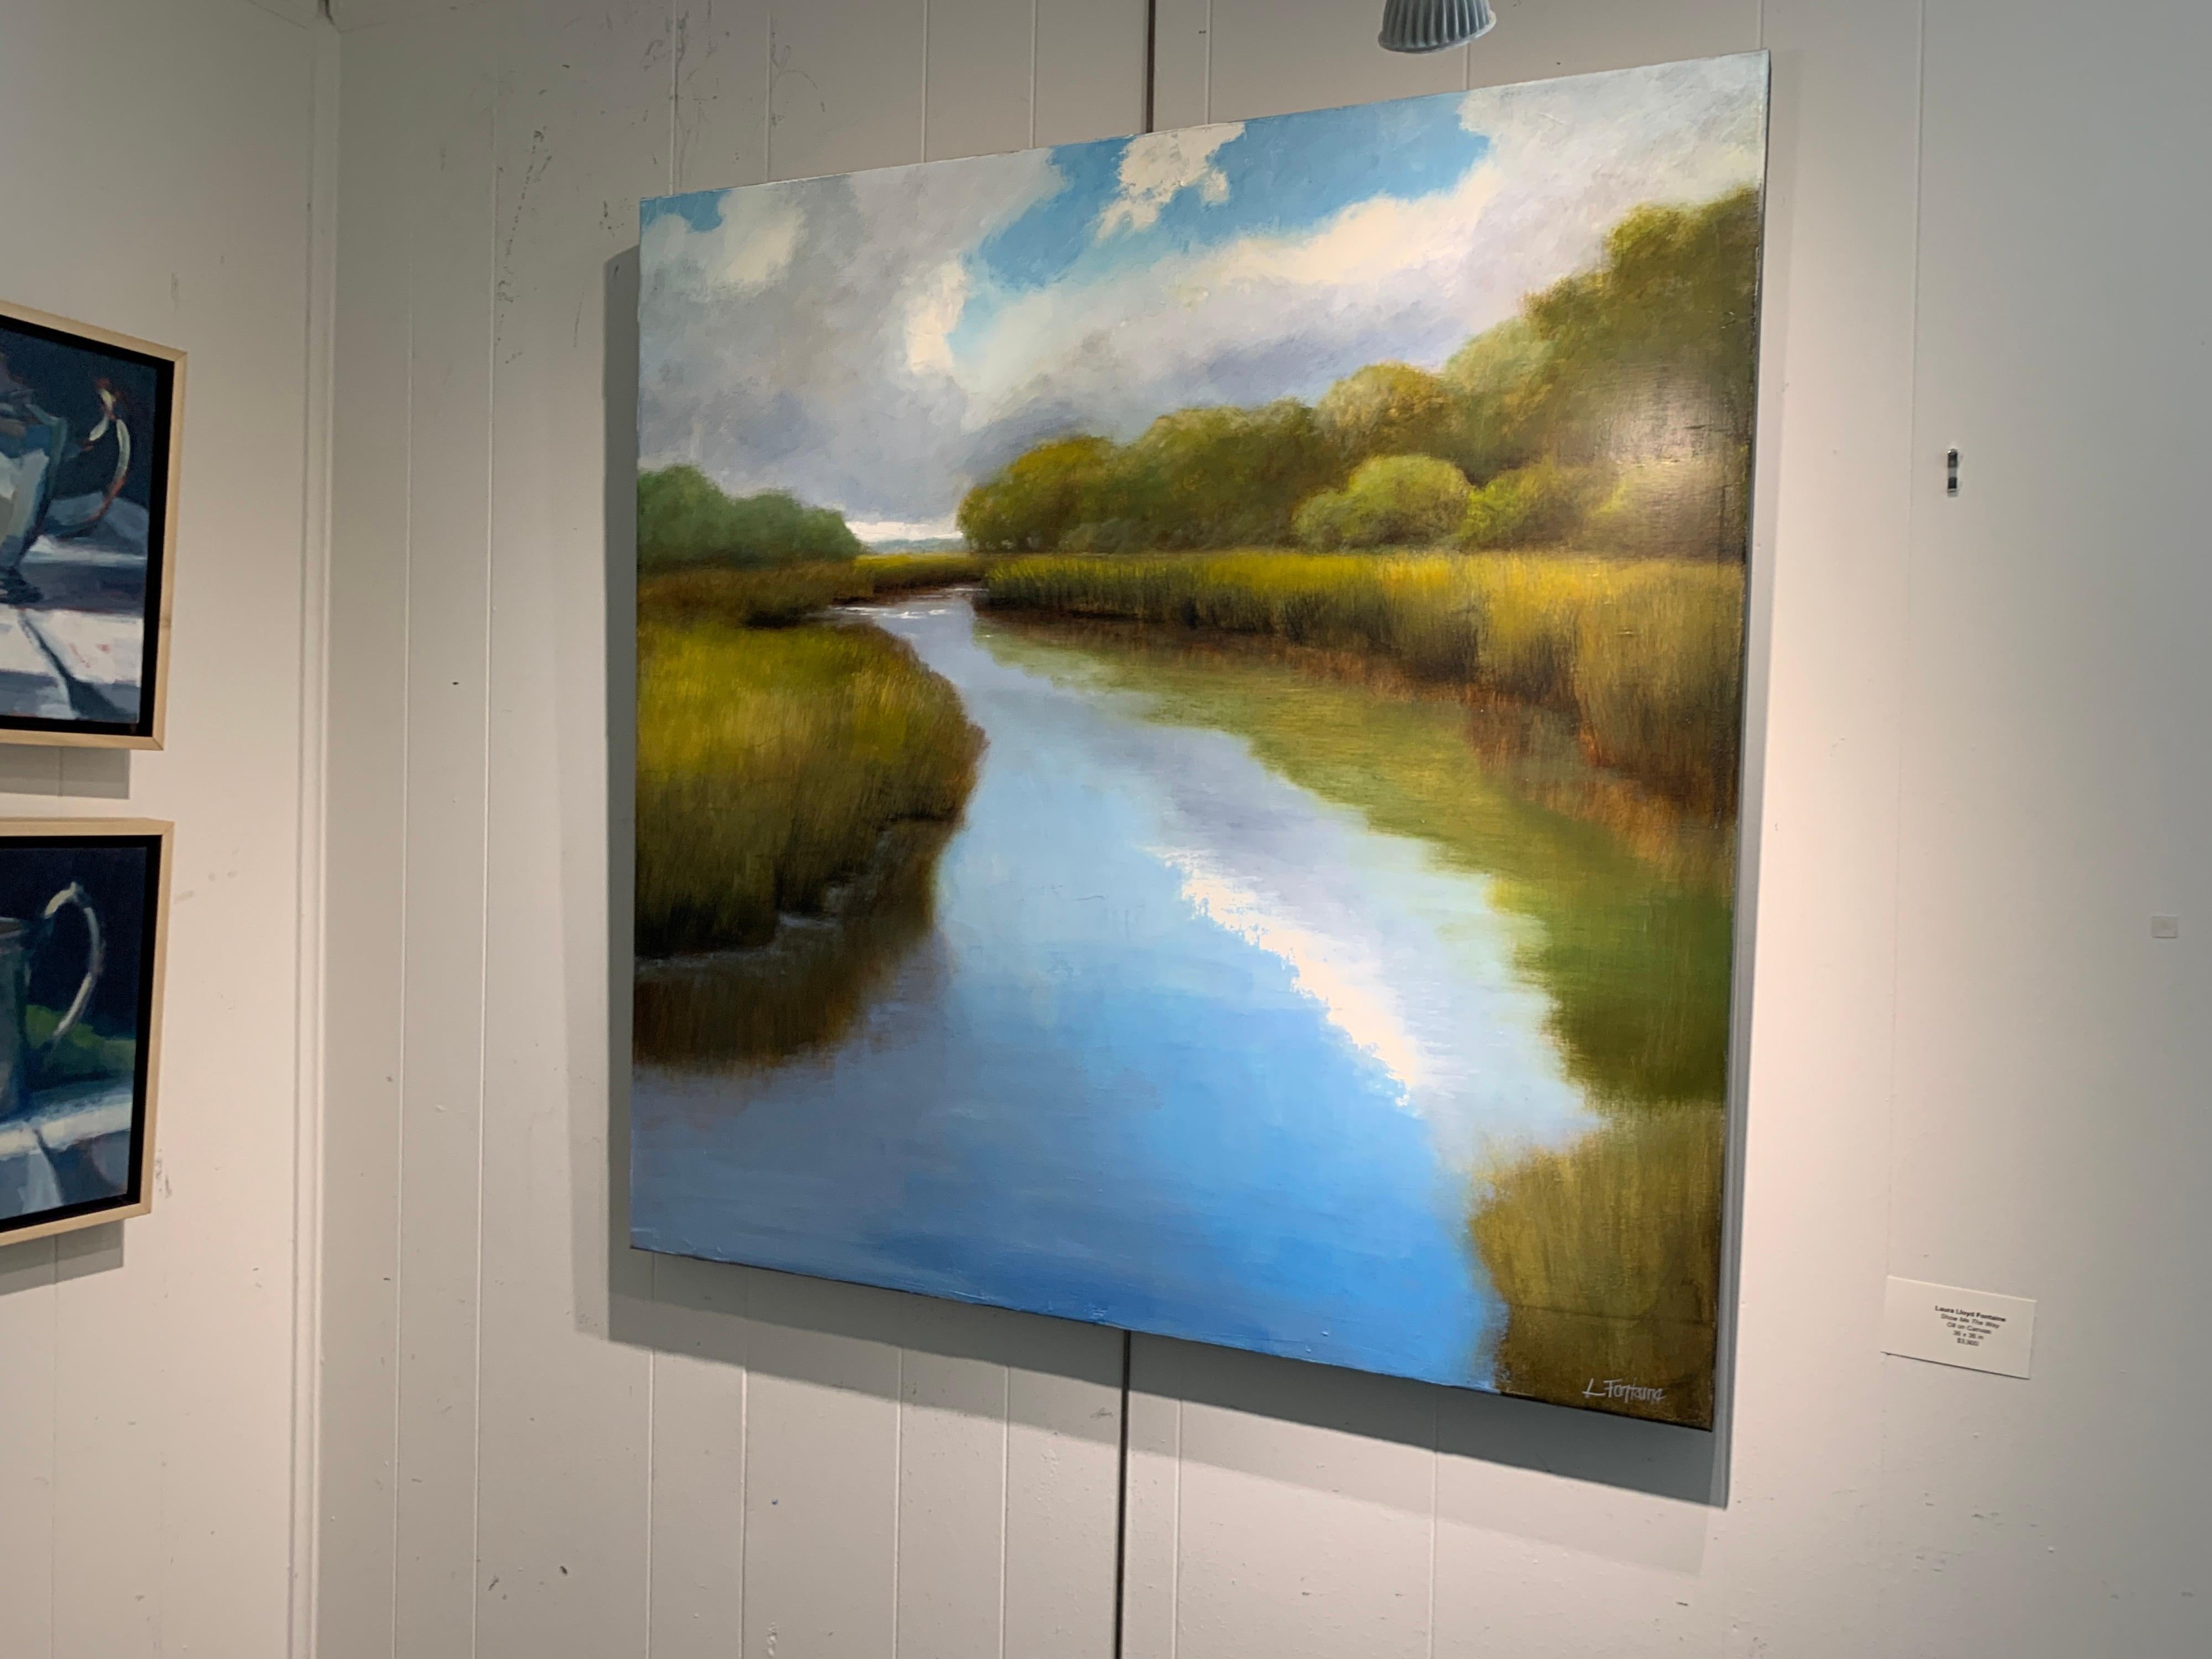 Show Me The Way by Laura Lloyd Fontaine, Green and Blue Landscape Painting 4